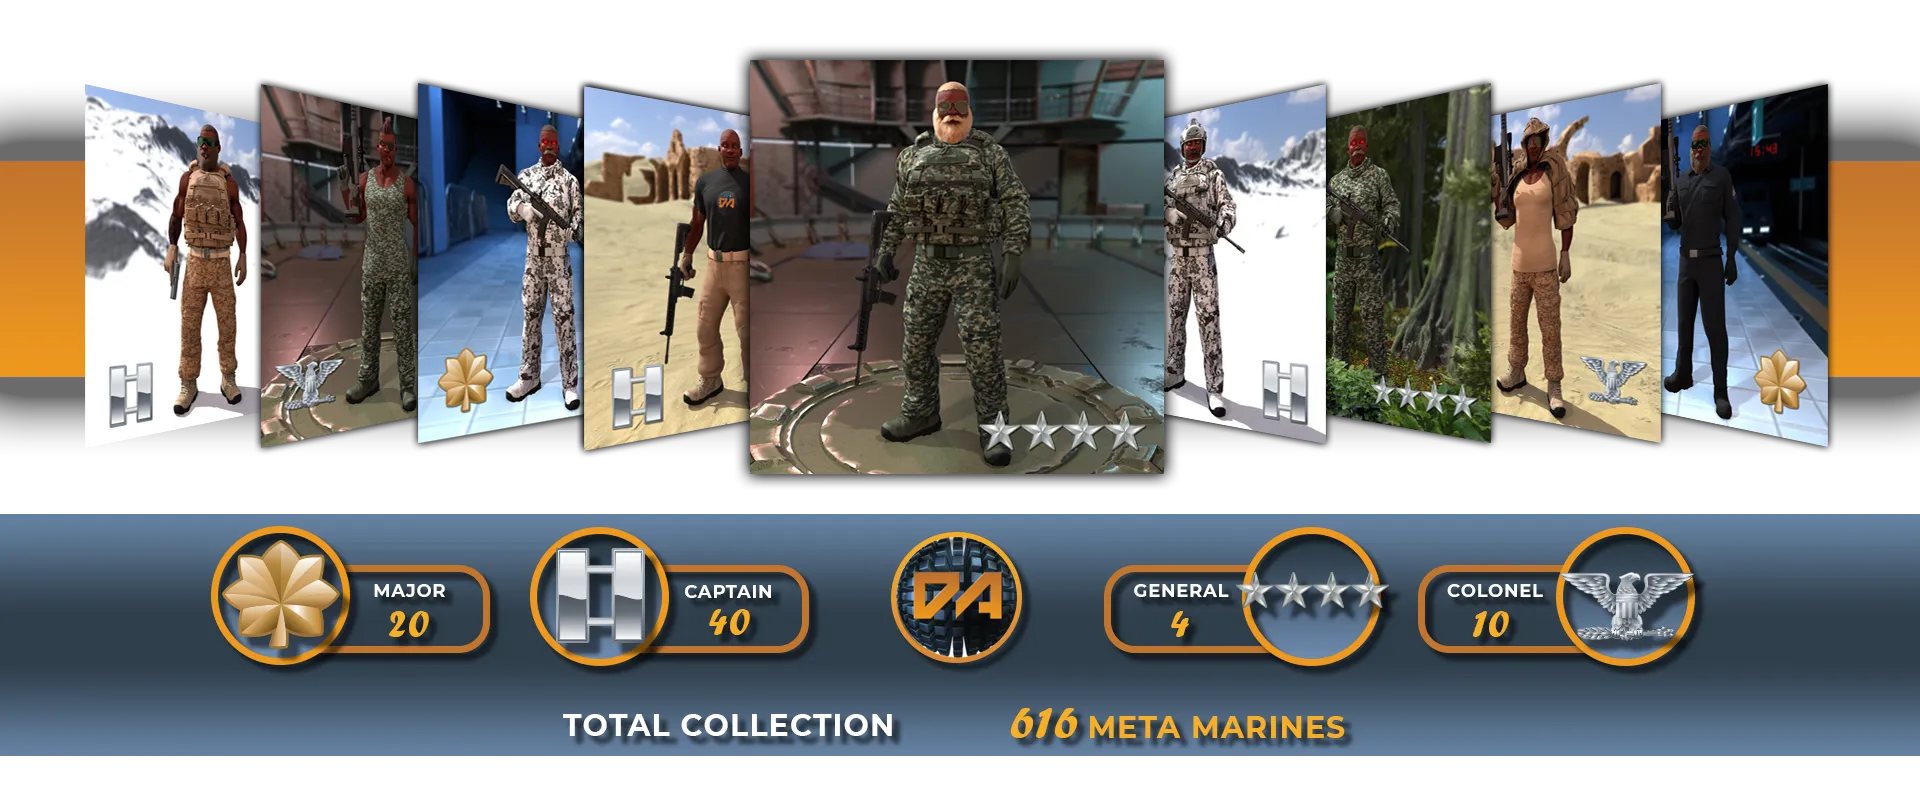 Meta Marines NFT collection sold out in just 36 hours!